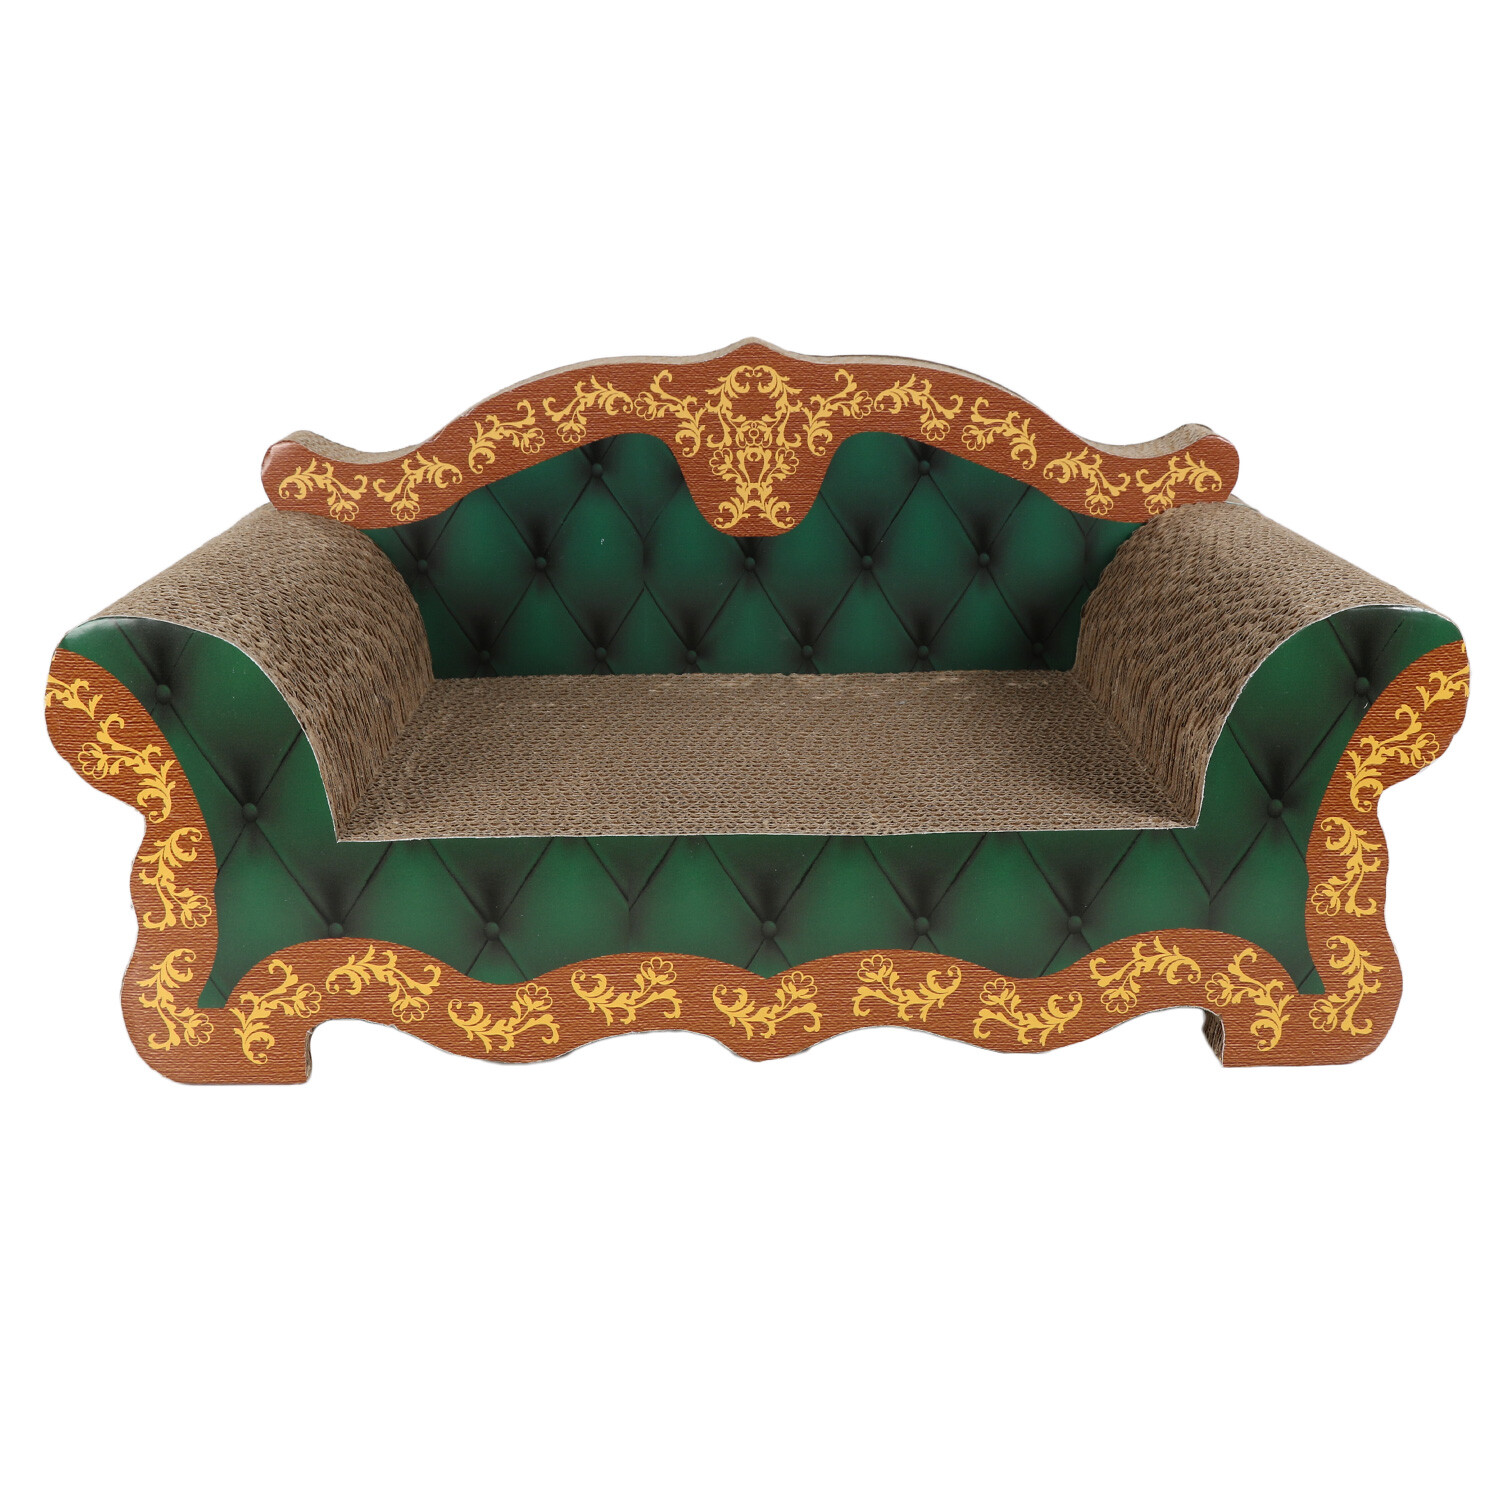 Single Clever Paws Royal Chair Scratcher Bed in Assorted styles Image 1